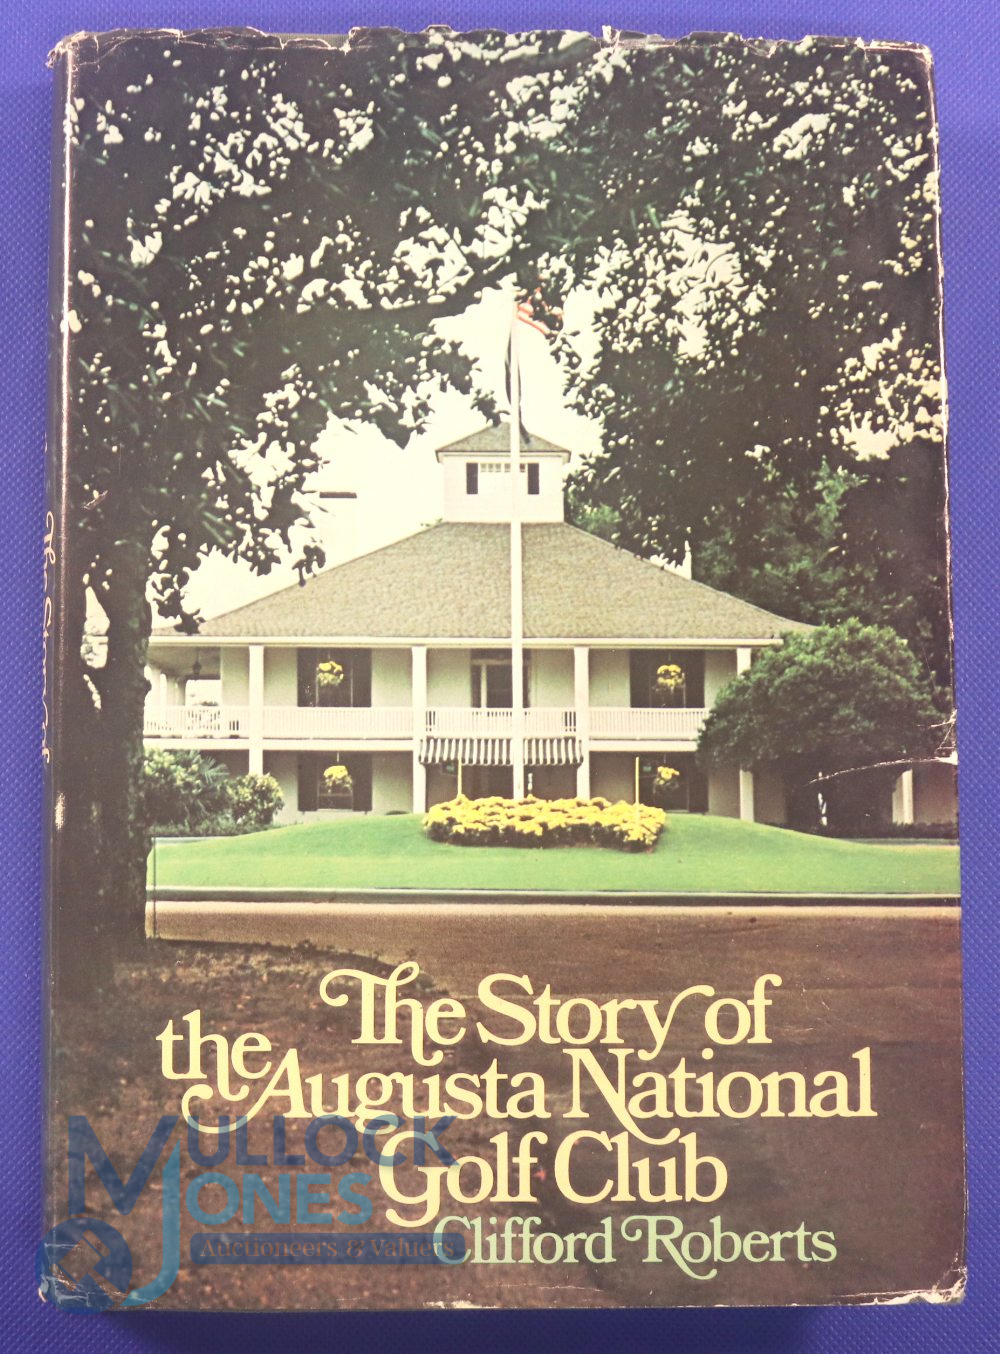 The Story of the Augusta National Golf Club - hardcover Clifford Roberts signed copy. The story of